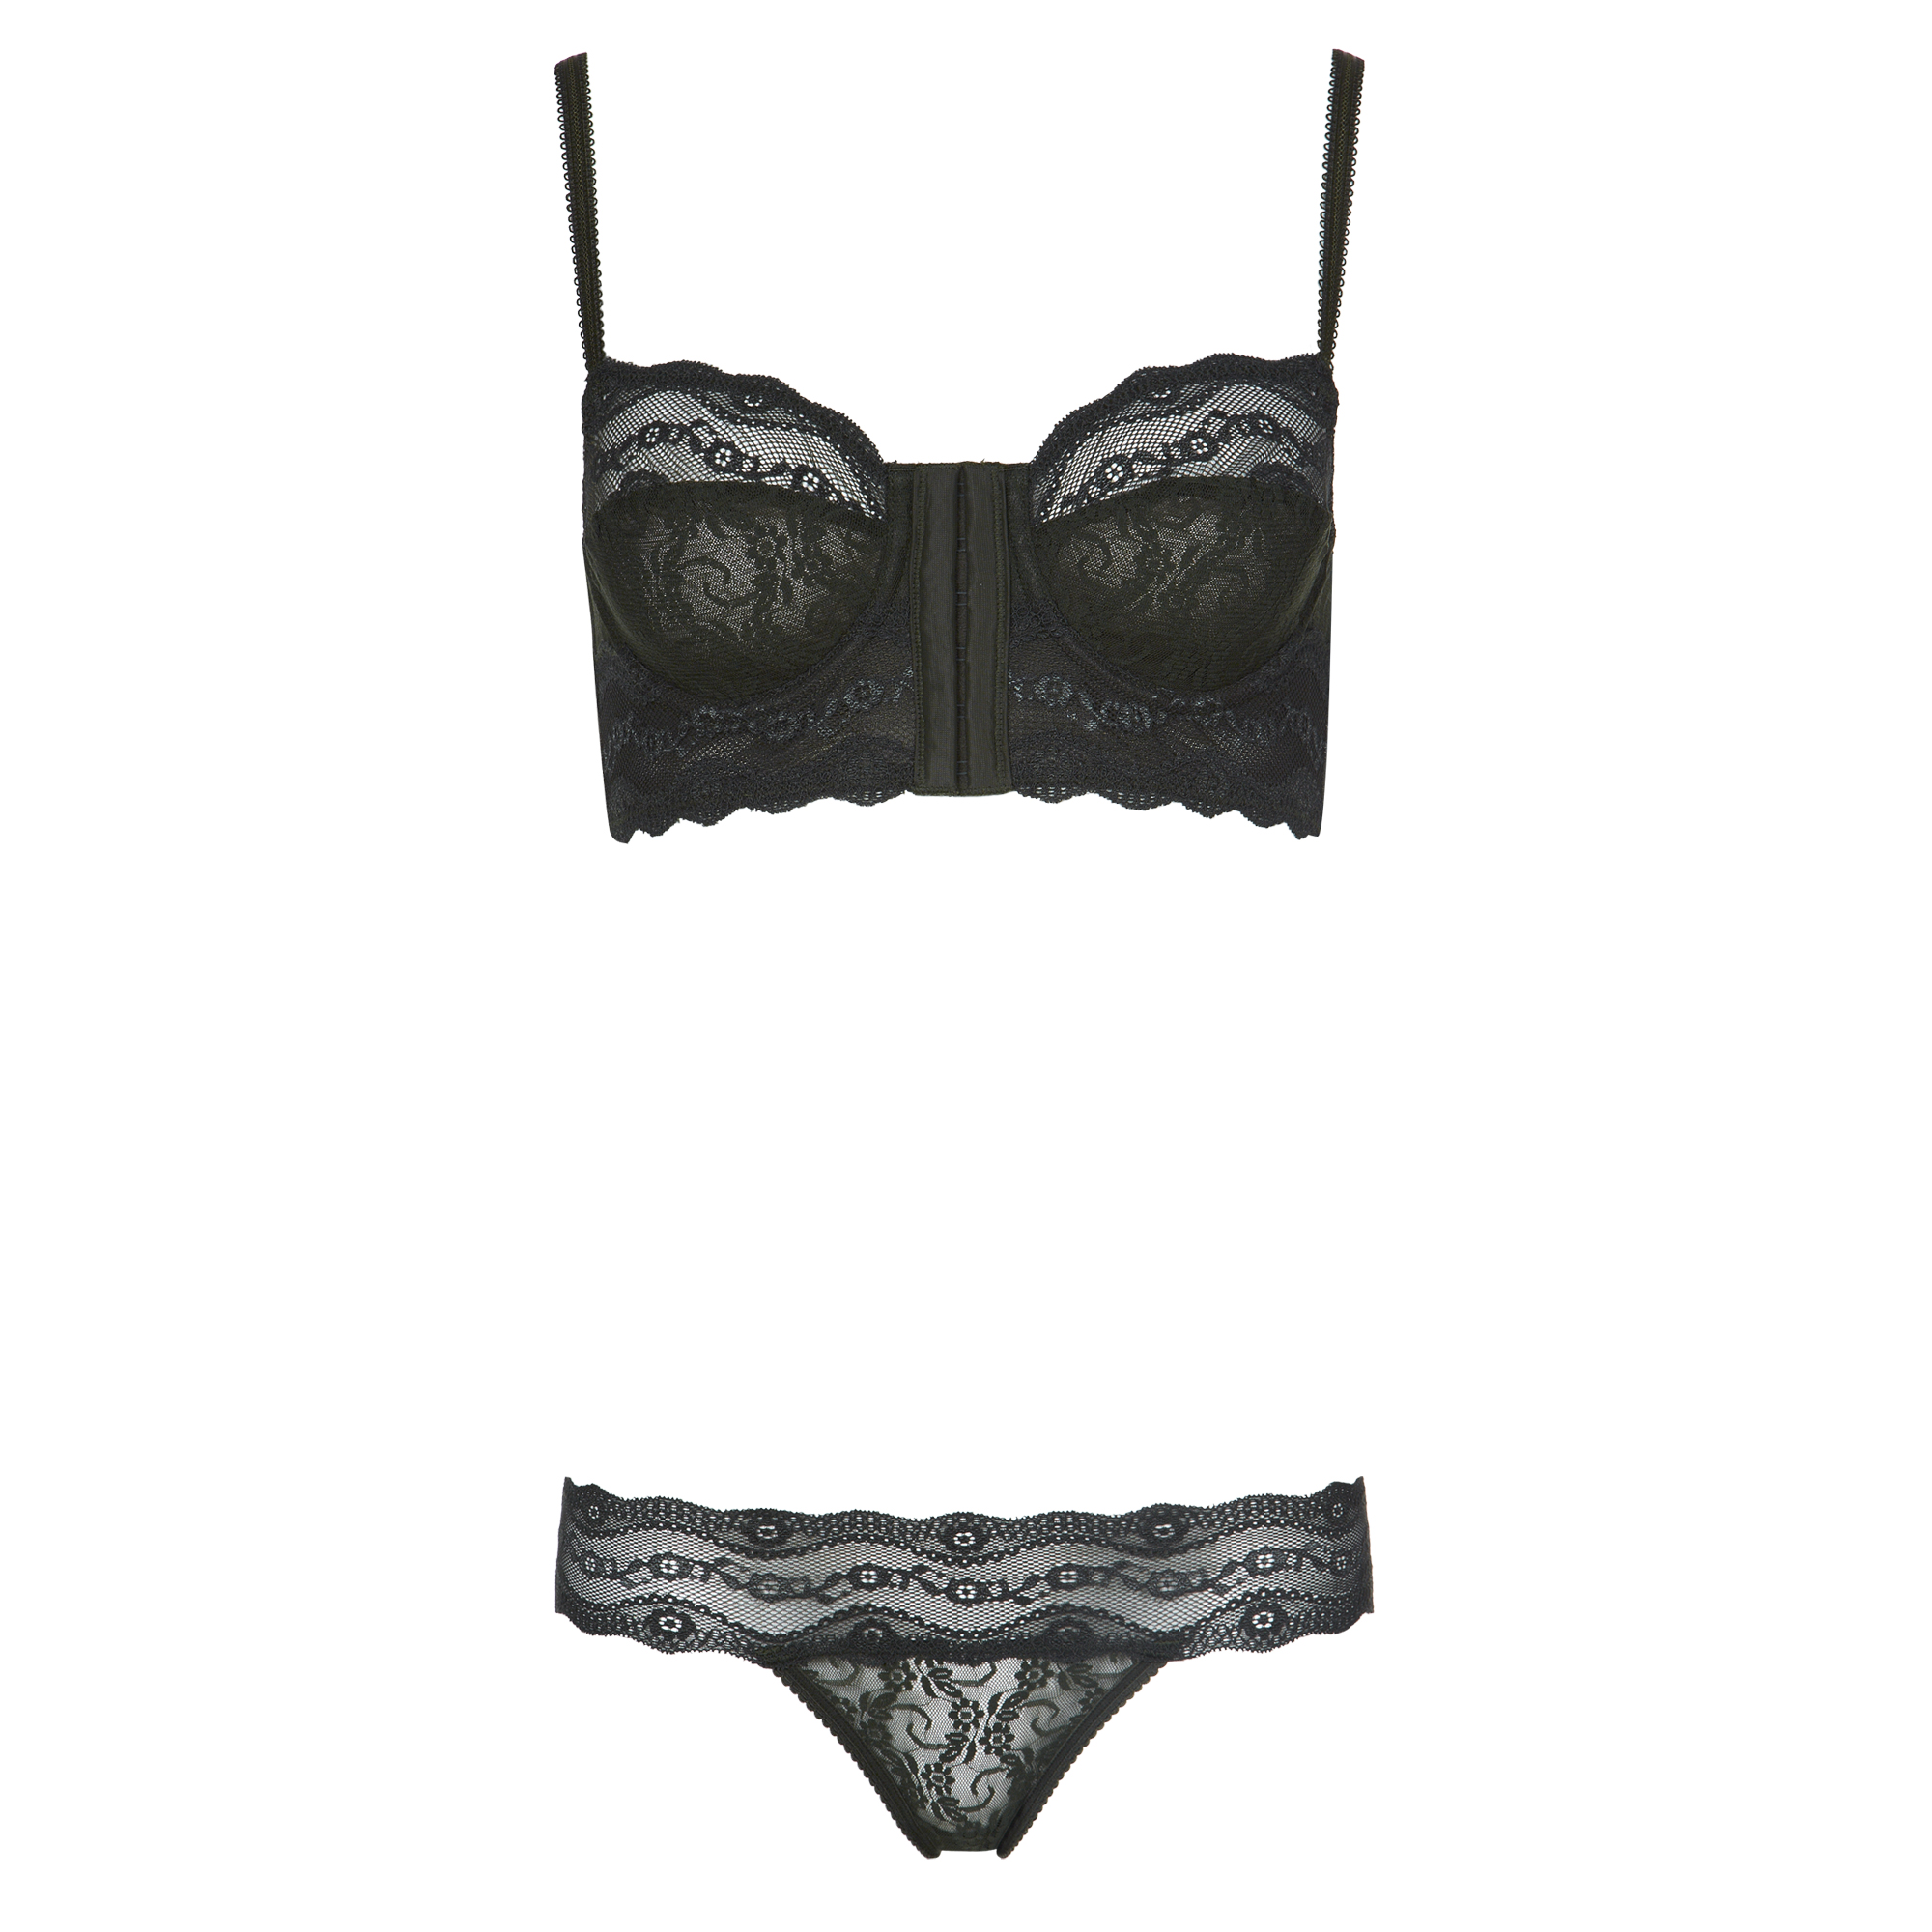 Lingerie Brands Present Key Styles For The Crop Top Trend